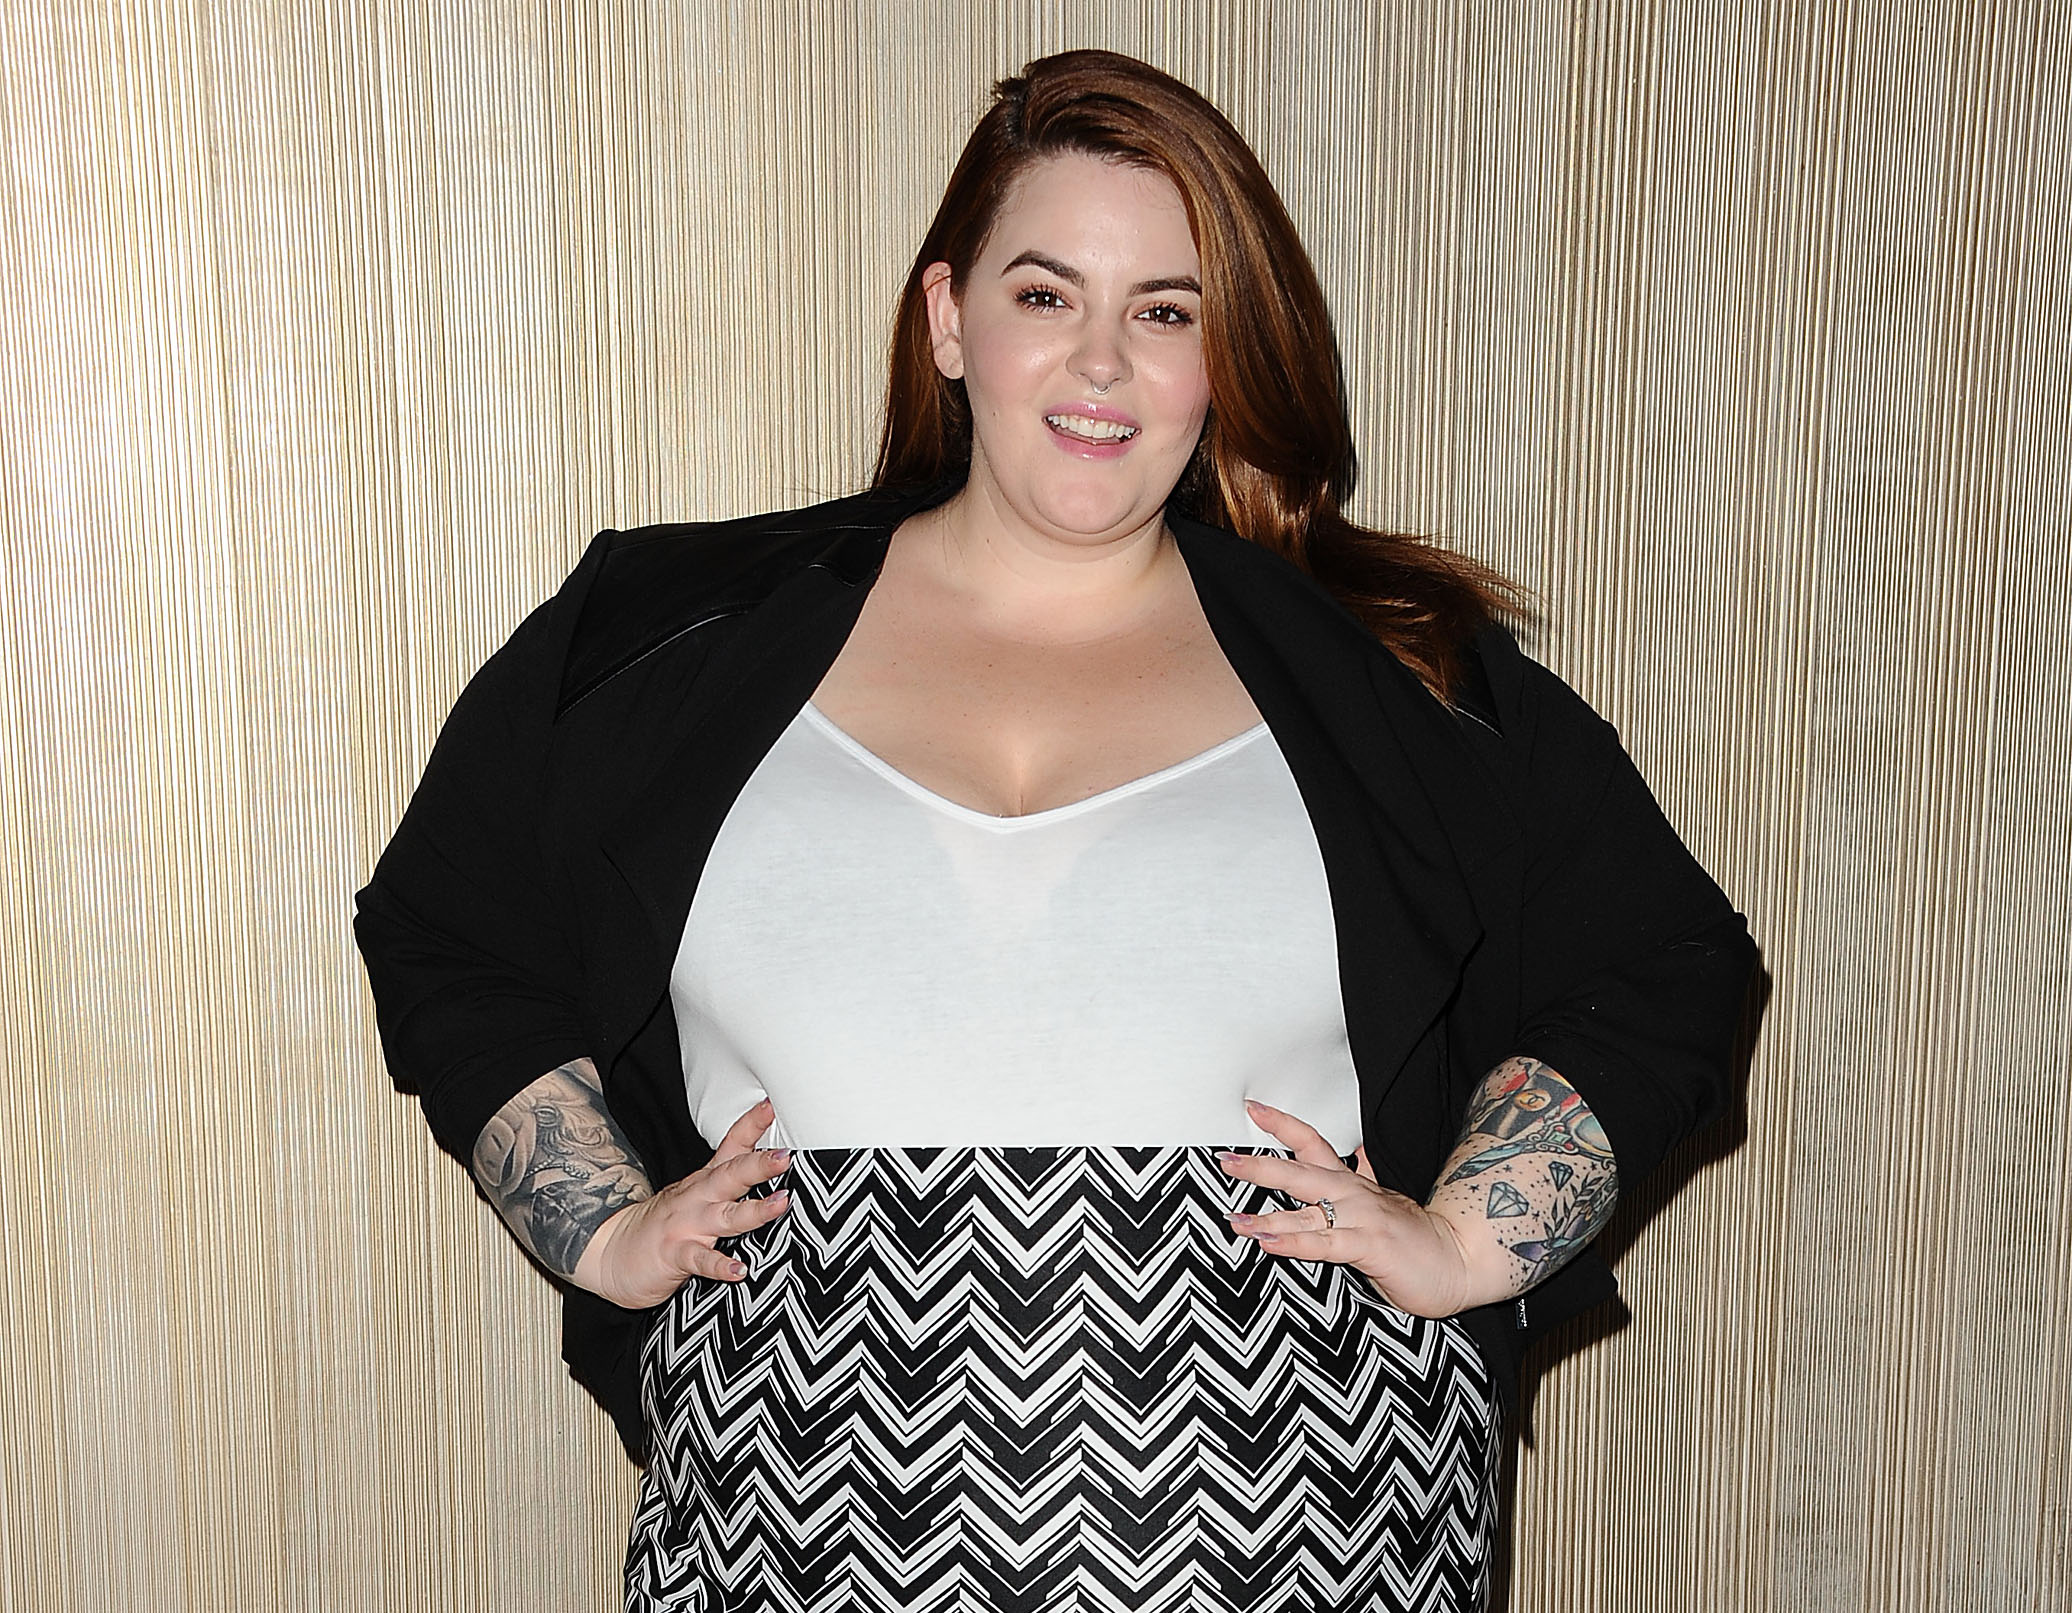 Model Tess Holliday attends the Dinner With a Cause 18th annual gala in Los Angeles, Calif. on Oct. 15, 2015.